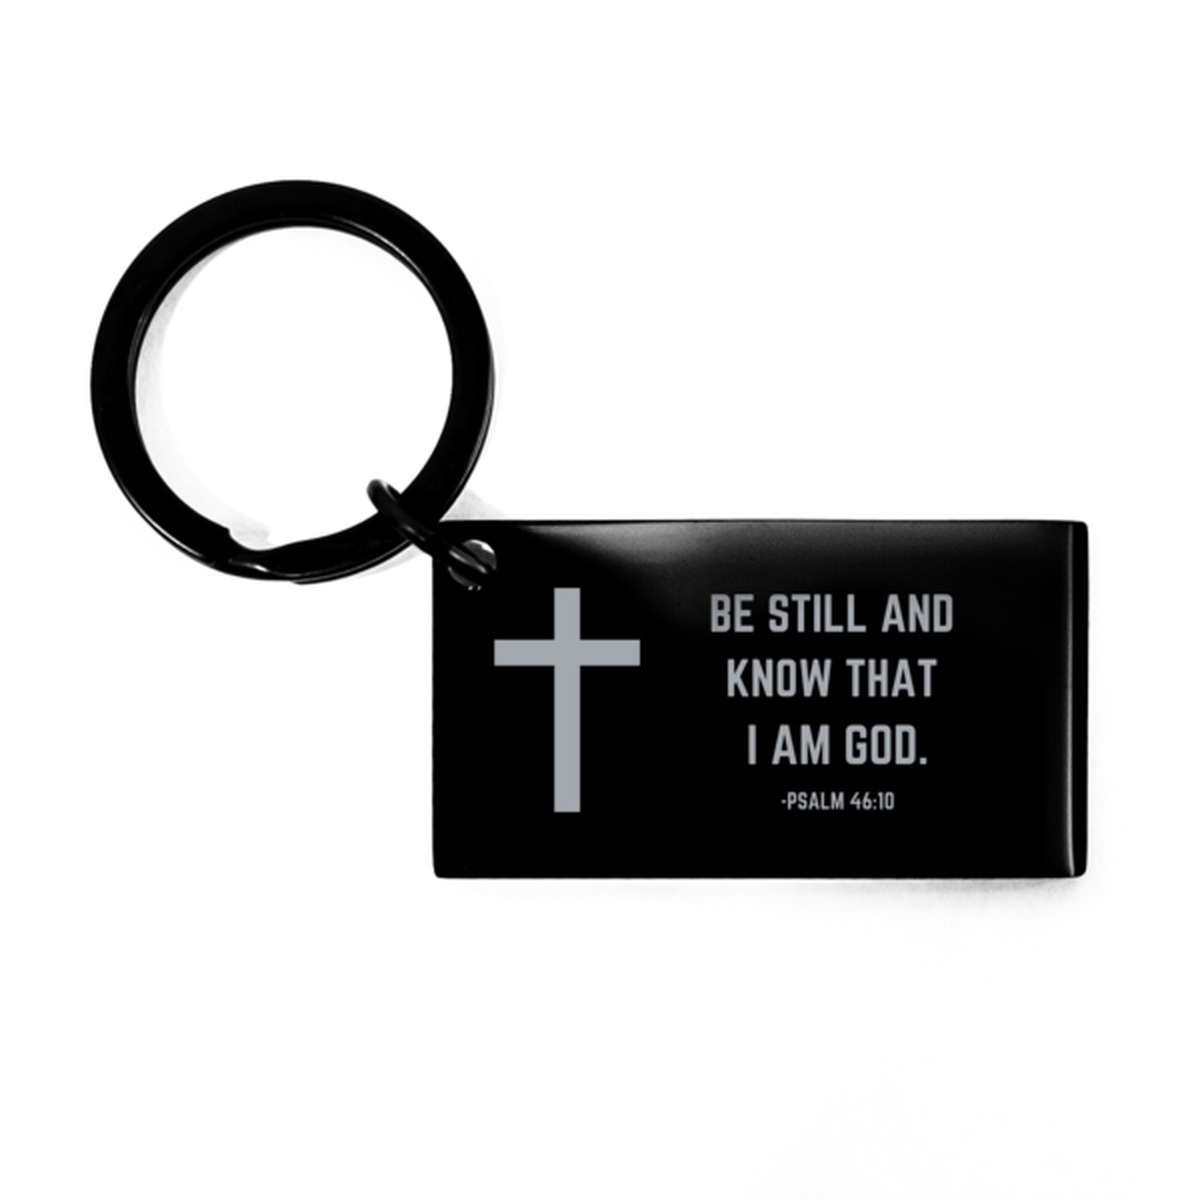 Baptism Gifts For Teenage Boys Girls, Christian Bible Verse Black Keychain, Be still and know that I am god, Confirmation Gifts, Bible Verse Keyring for Son, Godson, Grandson, Nephew